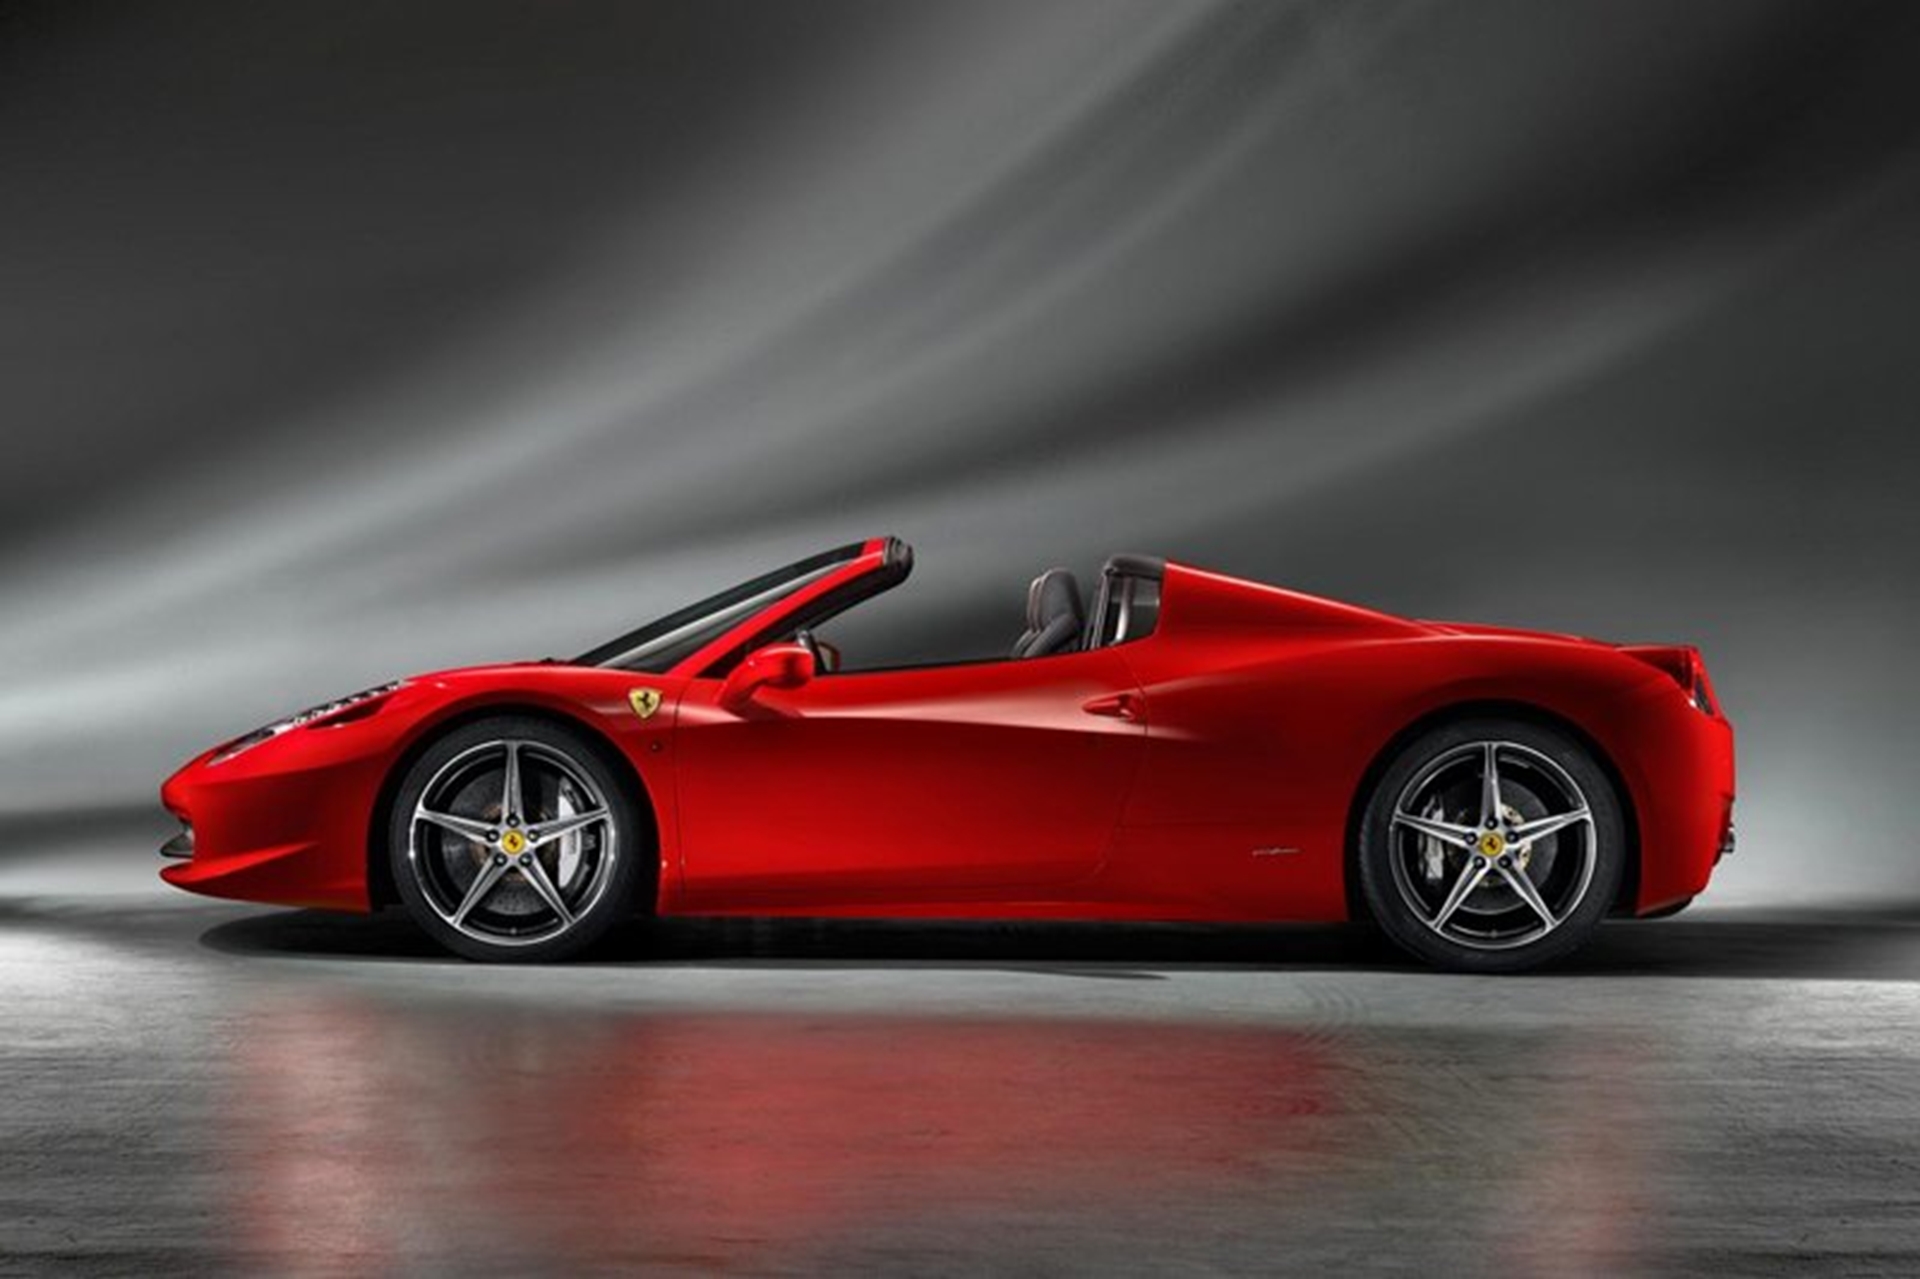 FERRARI 458 SPIDER DEBUTS AT FRANKFURT NEW EXCLUSIVE TAILOR-MADE PROGRAMME ALSO SHOWCASED